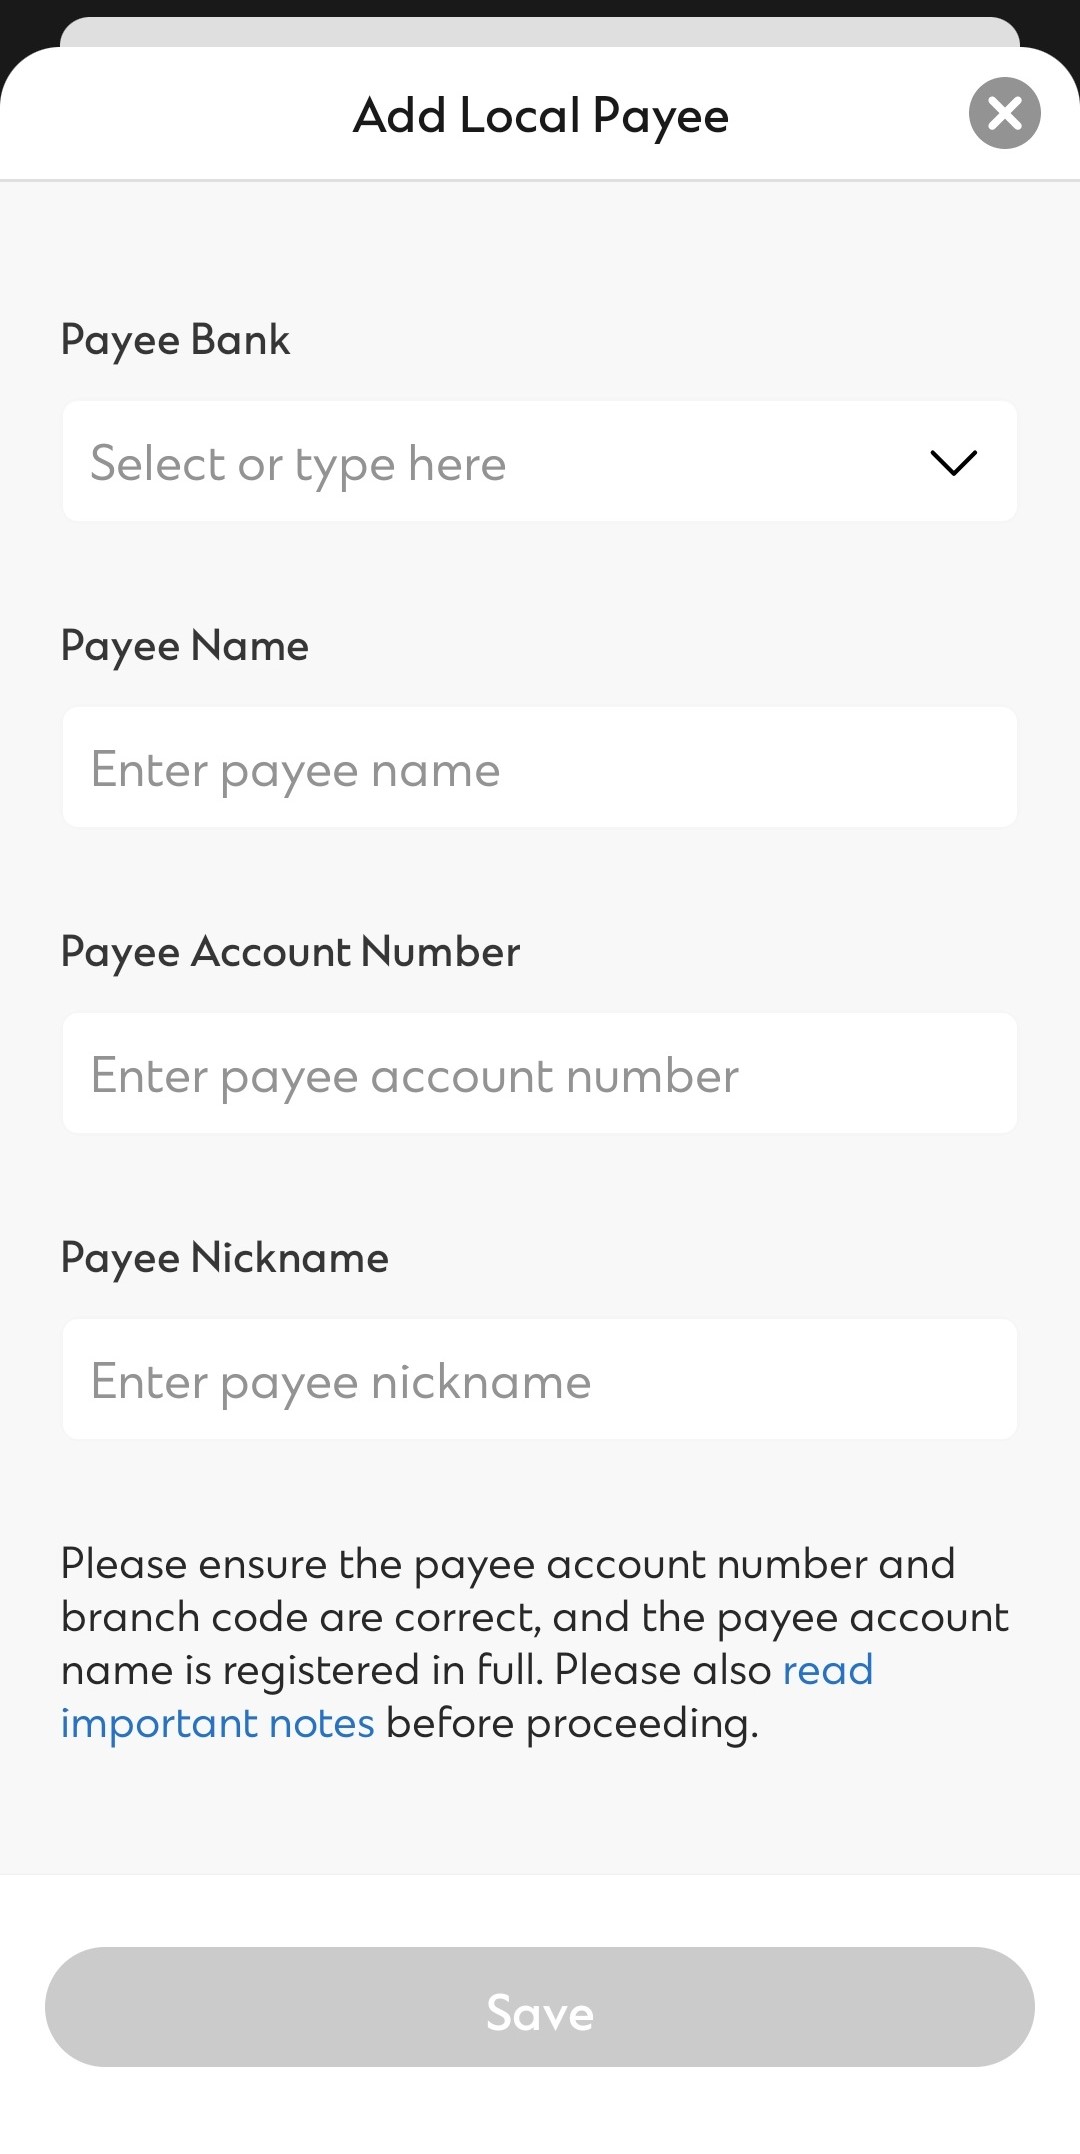 Login to Online Banking and add local account payee using the 10-digit WeChat Pay HK account number. Learn more about Local Account Fund Transfer